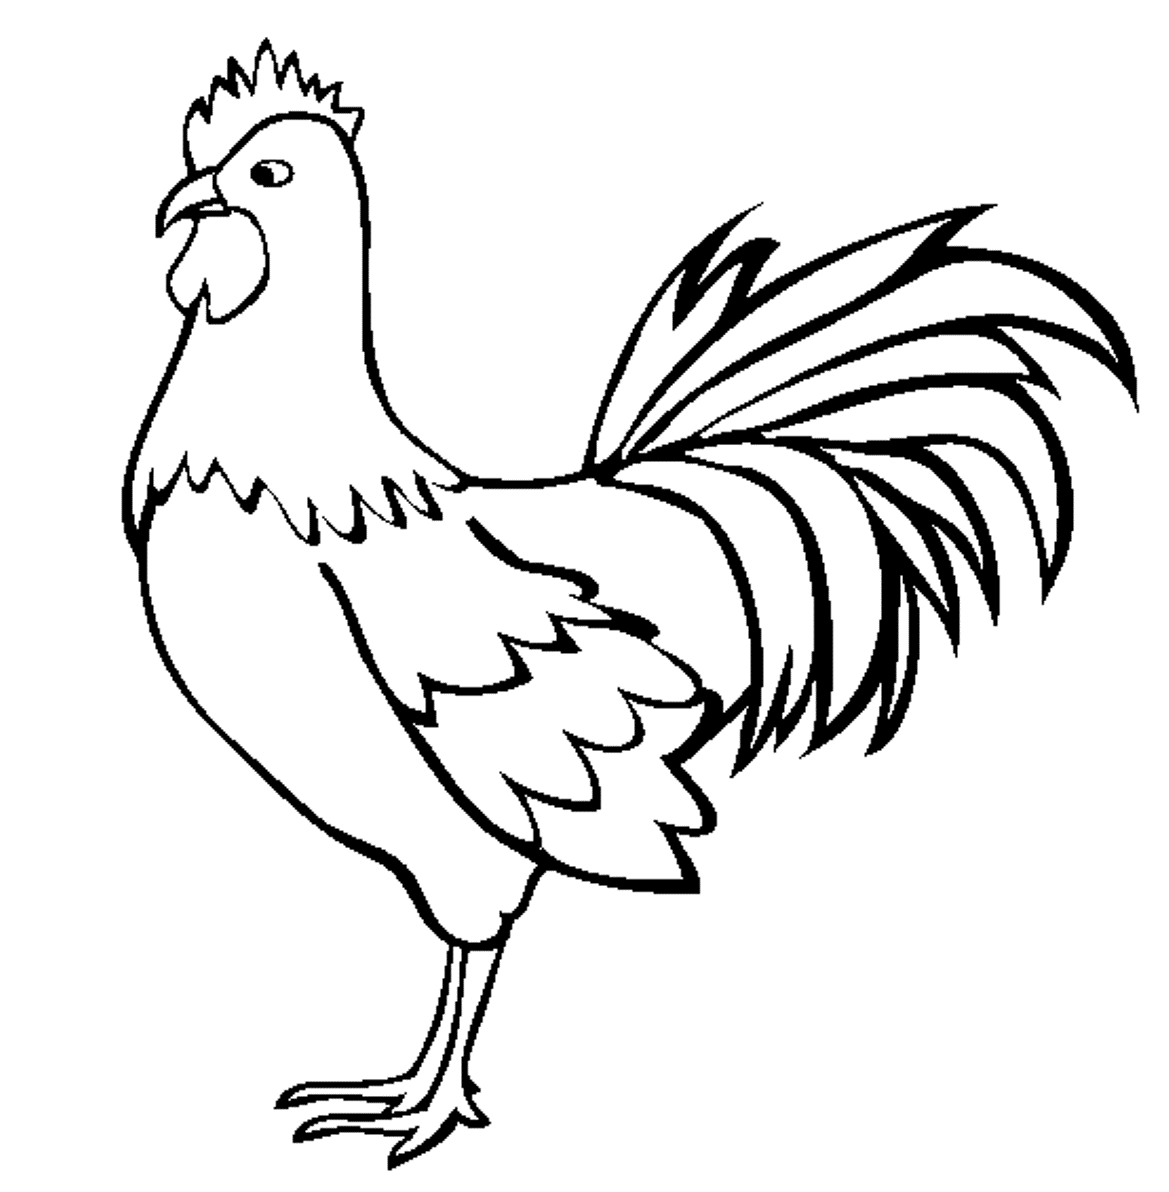 Farm Animals Coloring Pages Hens And Rooster | Animal Coloring ...